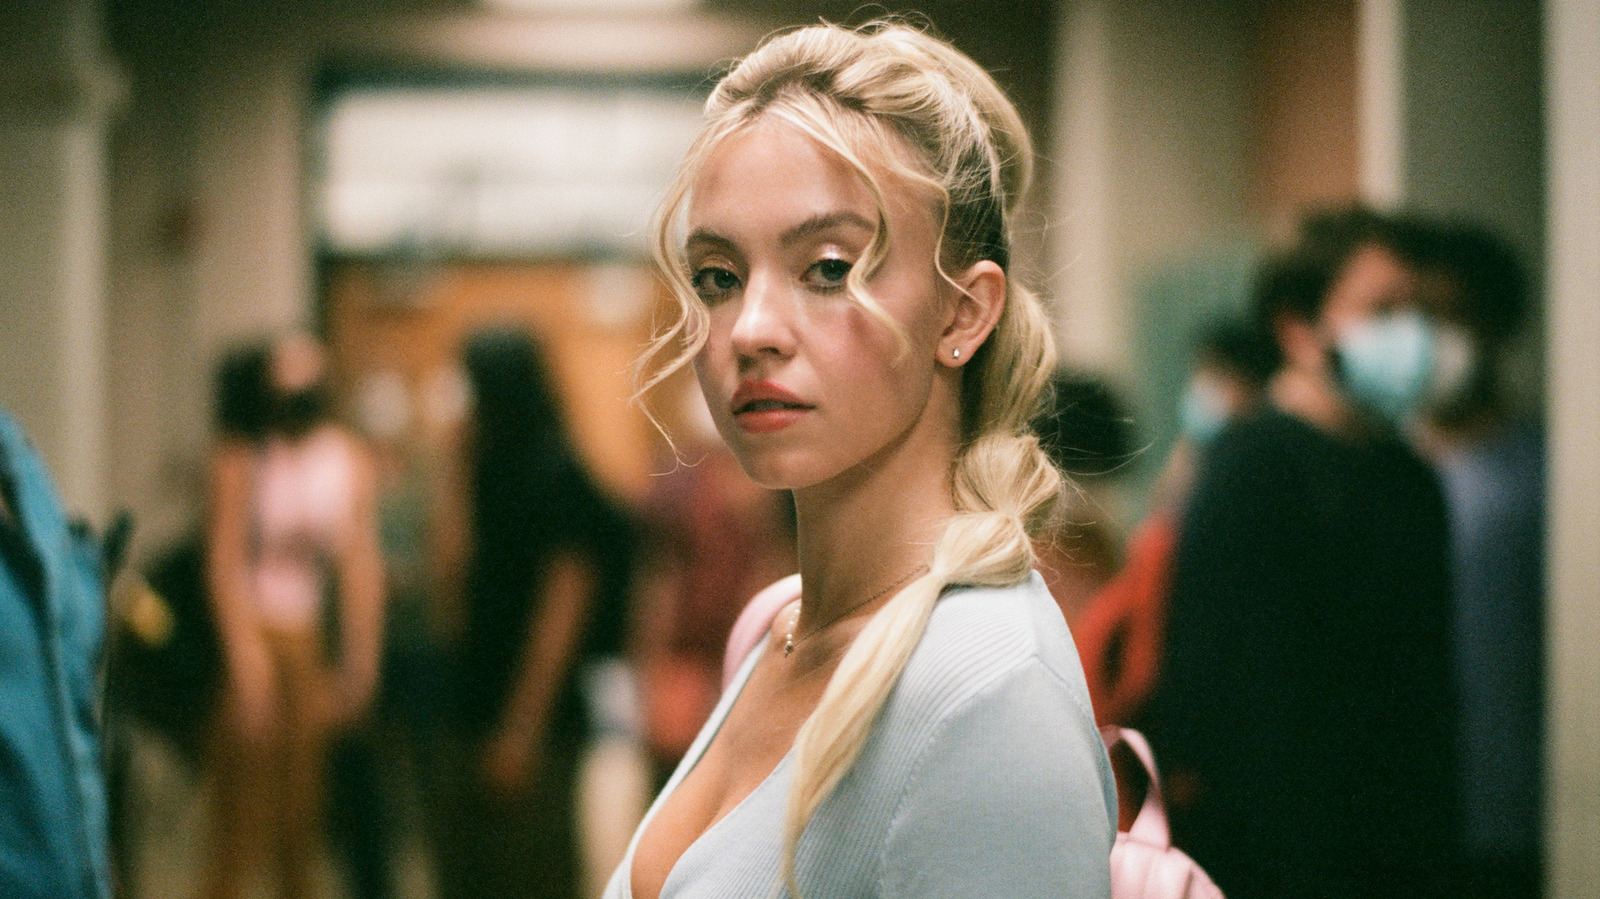 Sydney Sweeney To Reteam With Michael Mohan For Psychological Horror Film Immaculate